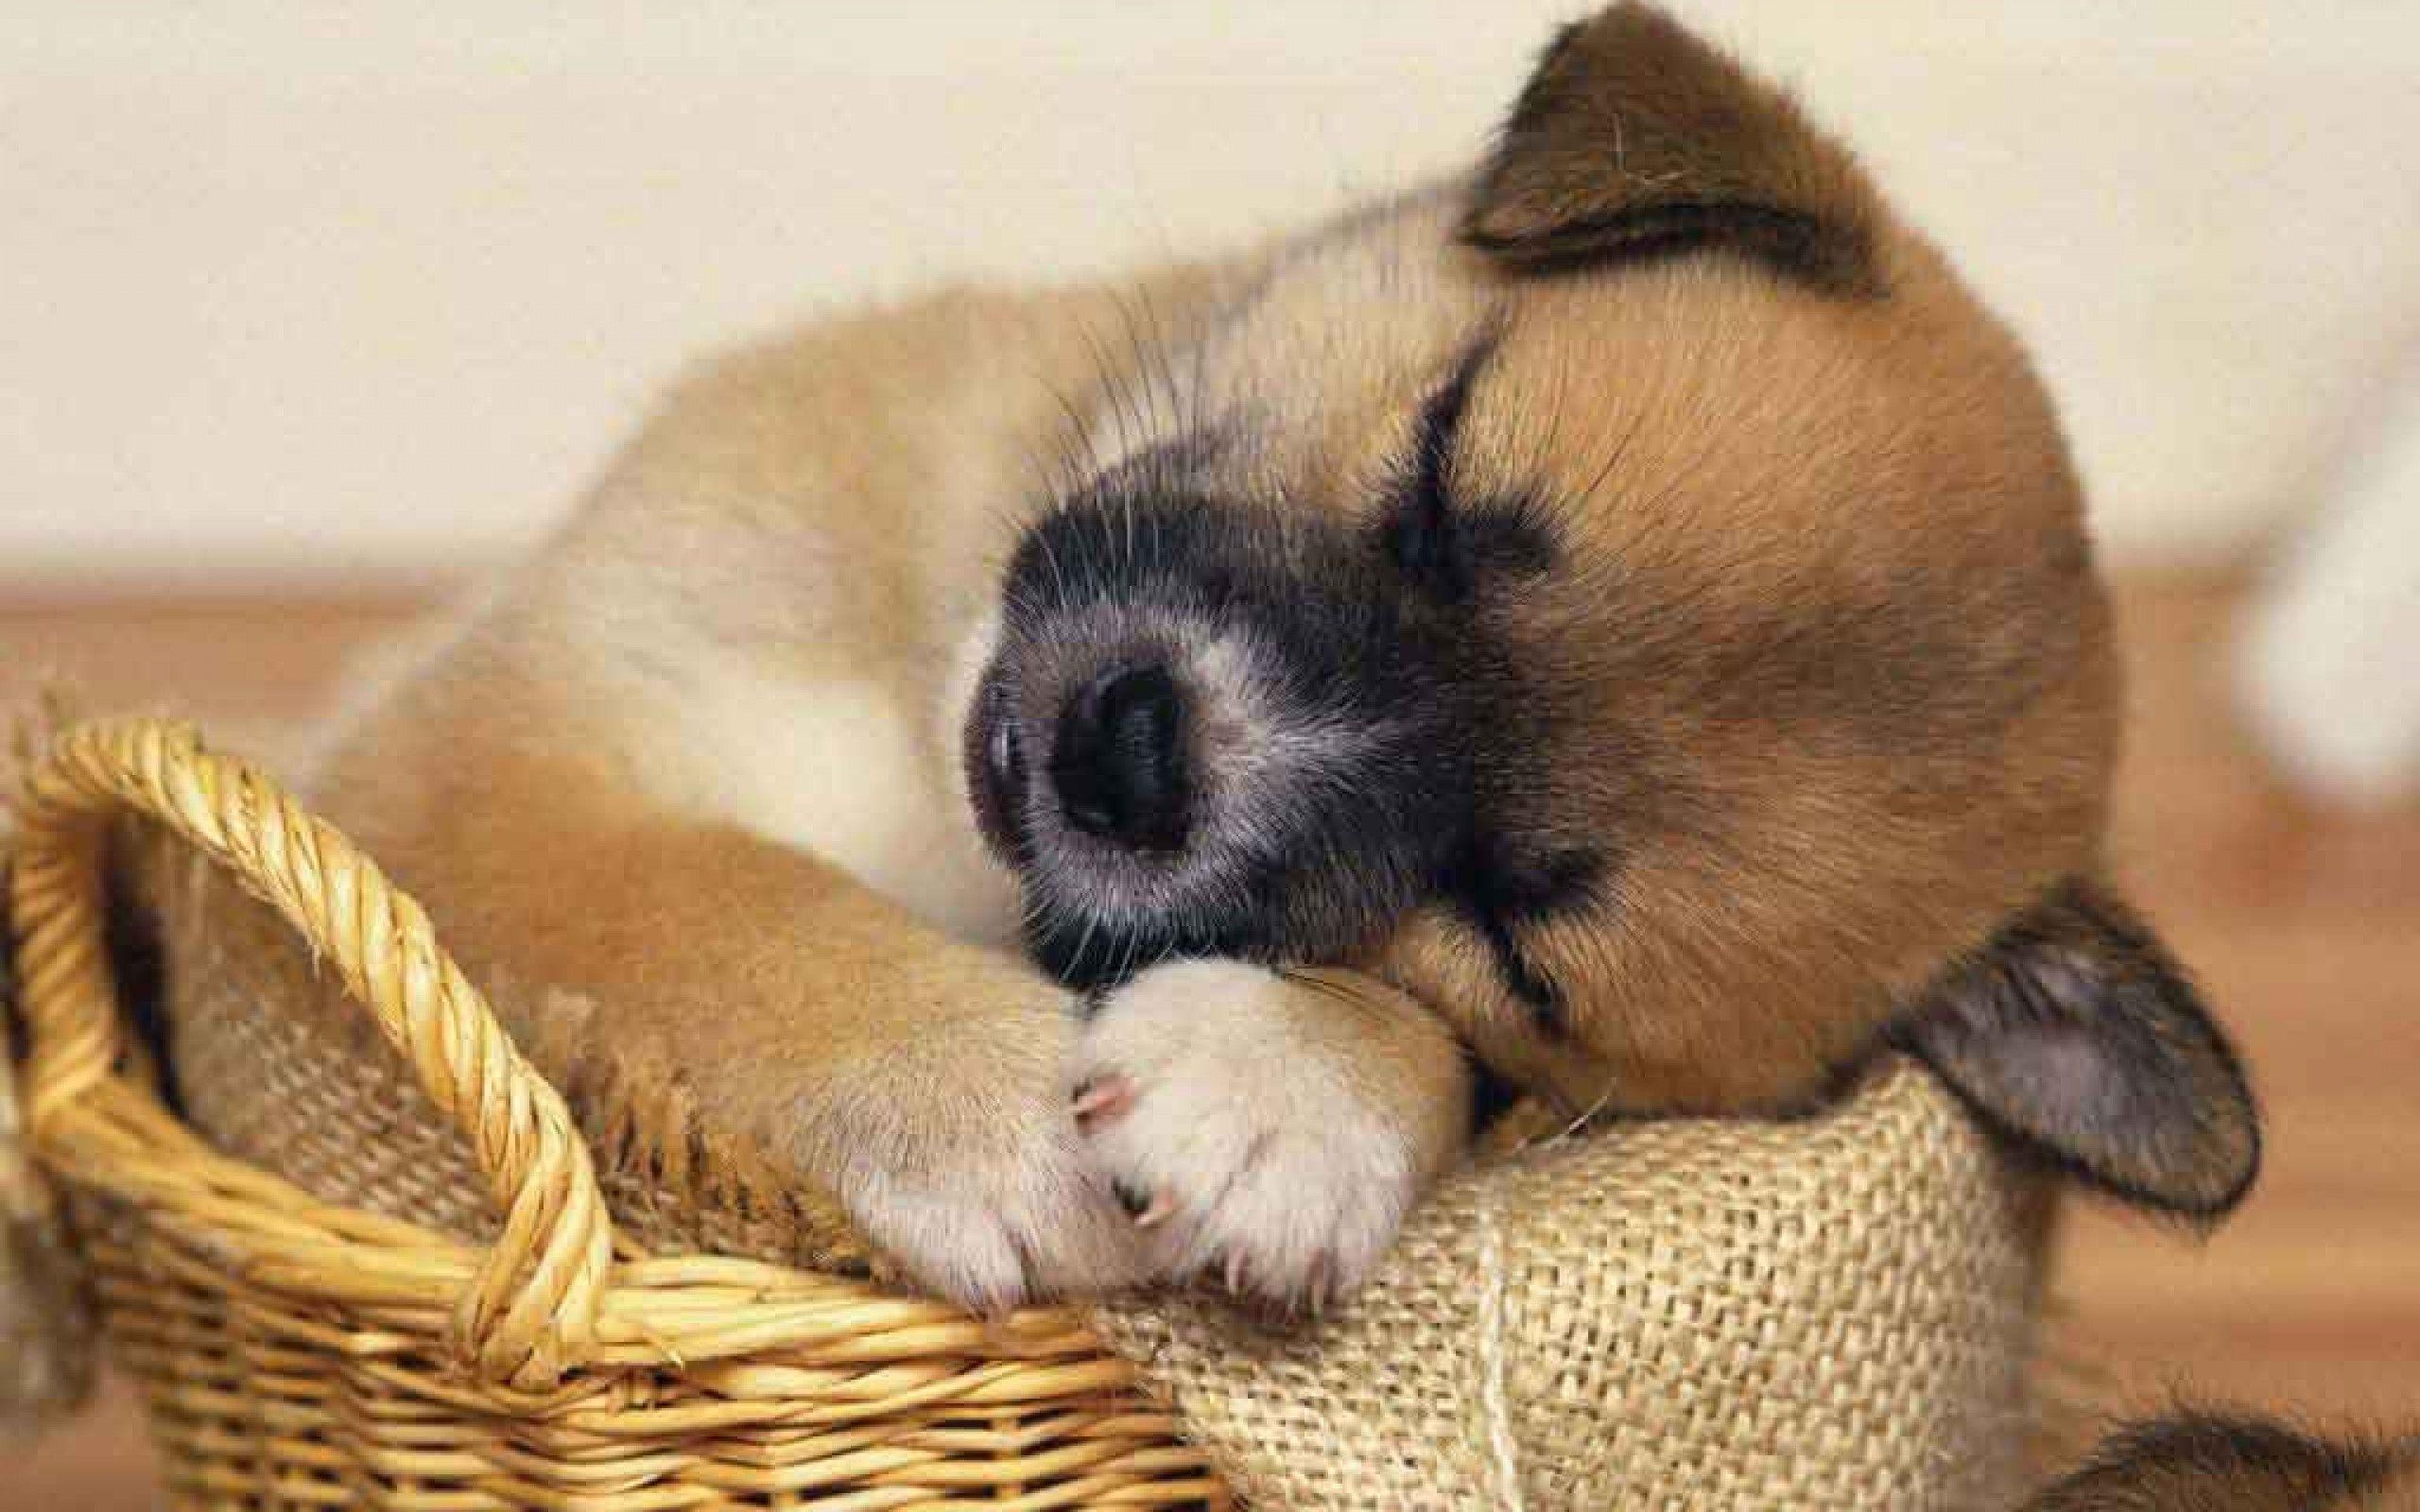 hd wallpapers of cute puppies